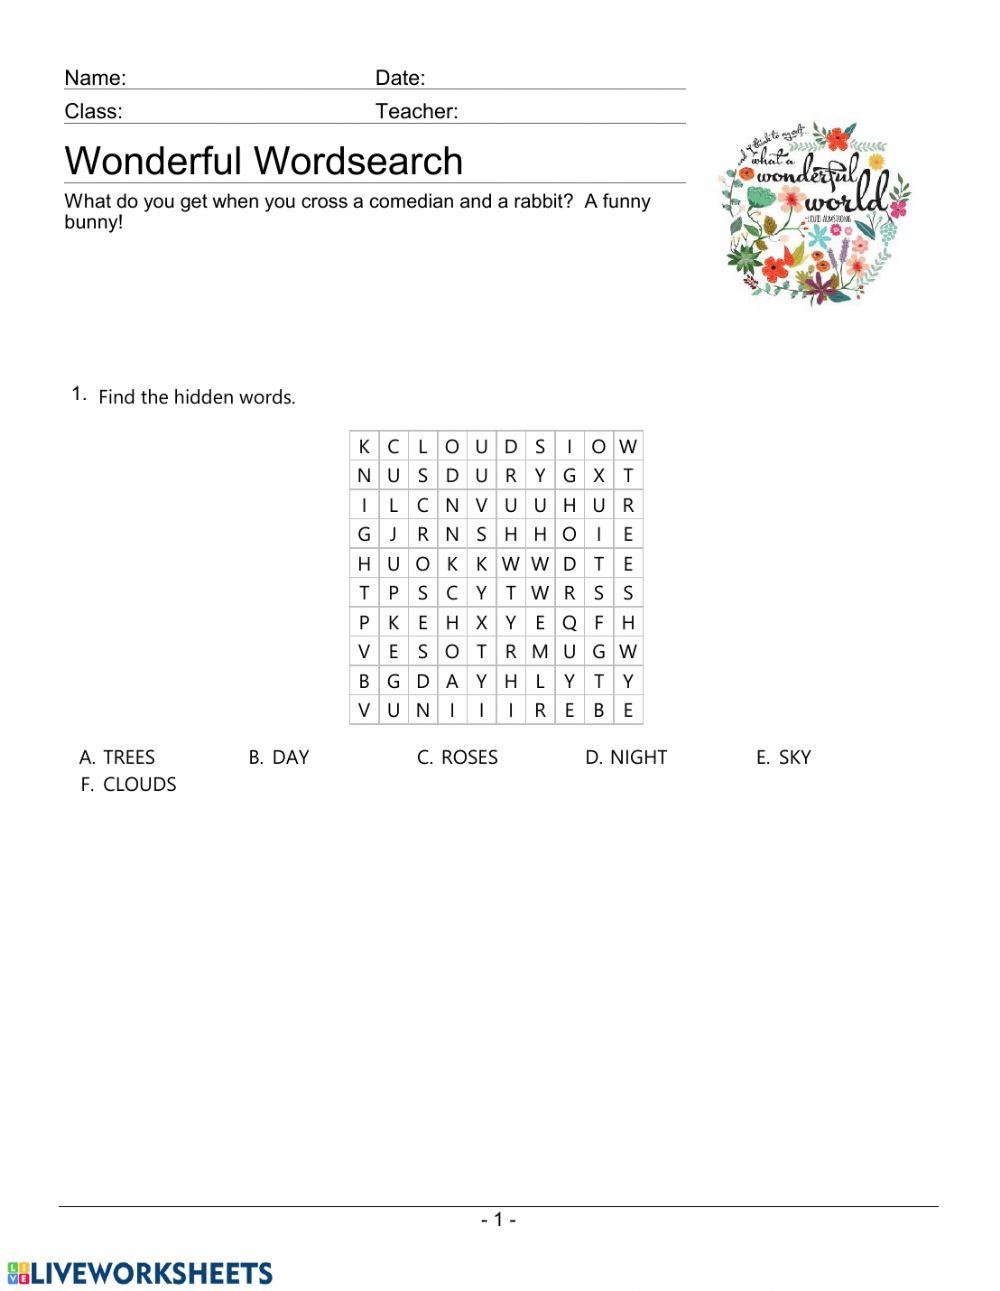 I see trees of green wordsearch